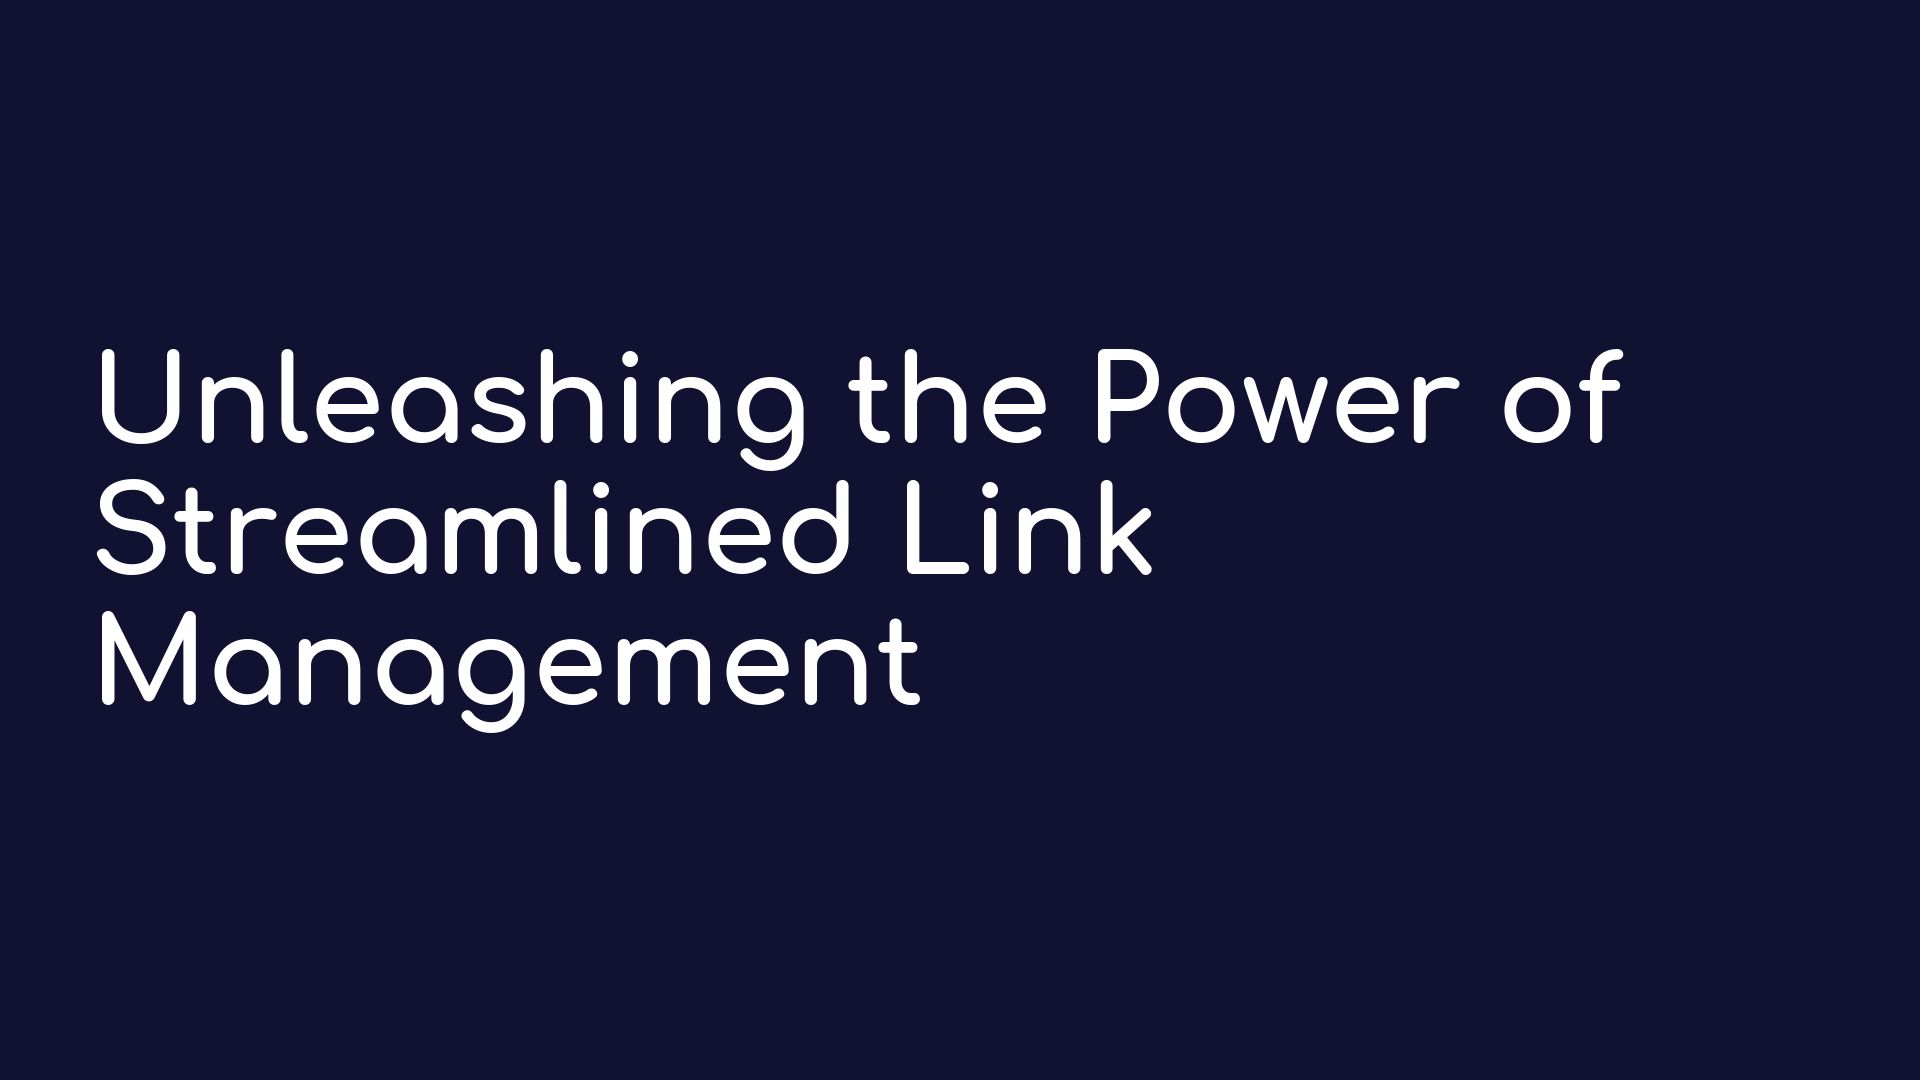 Unleashing the Power of Streamlined Link Management